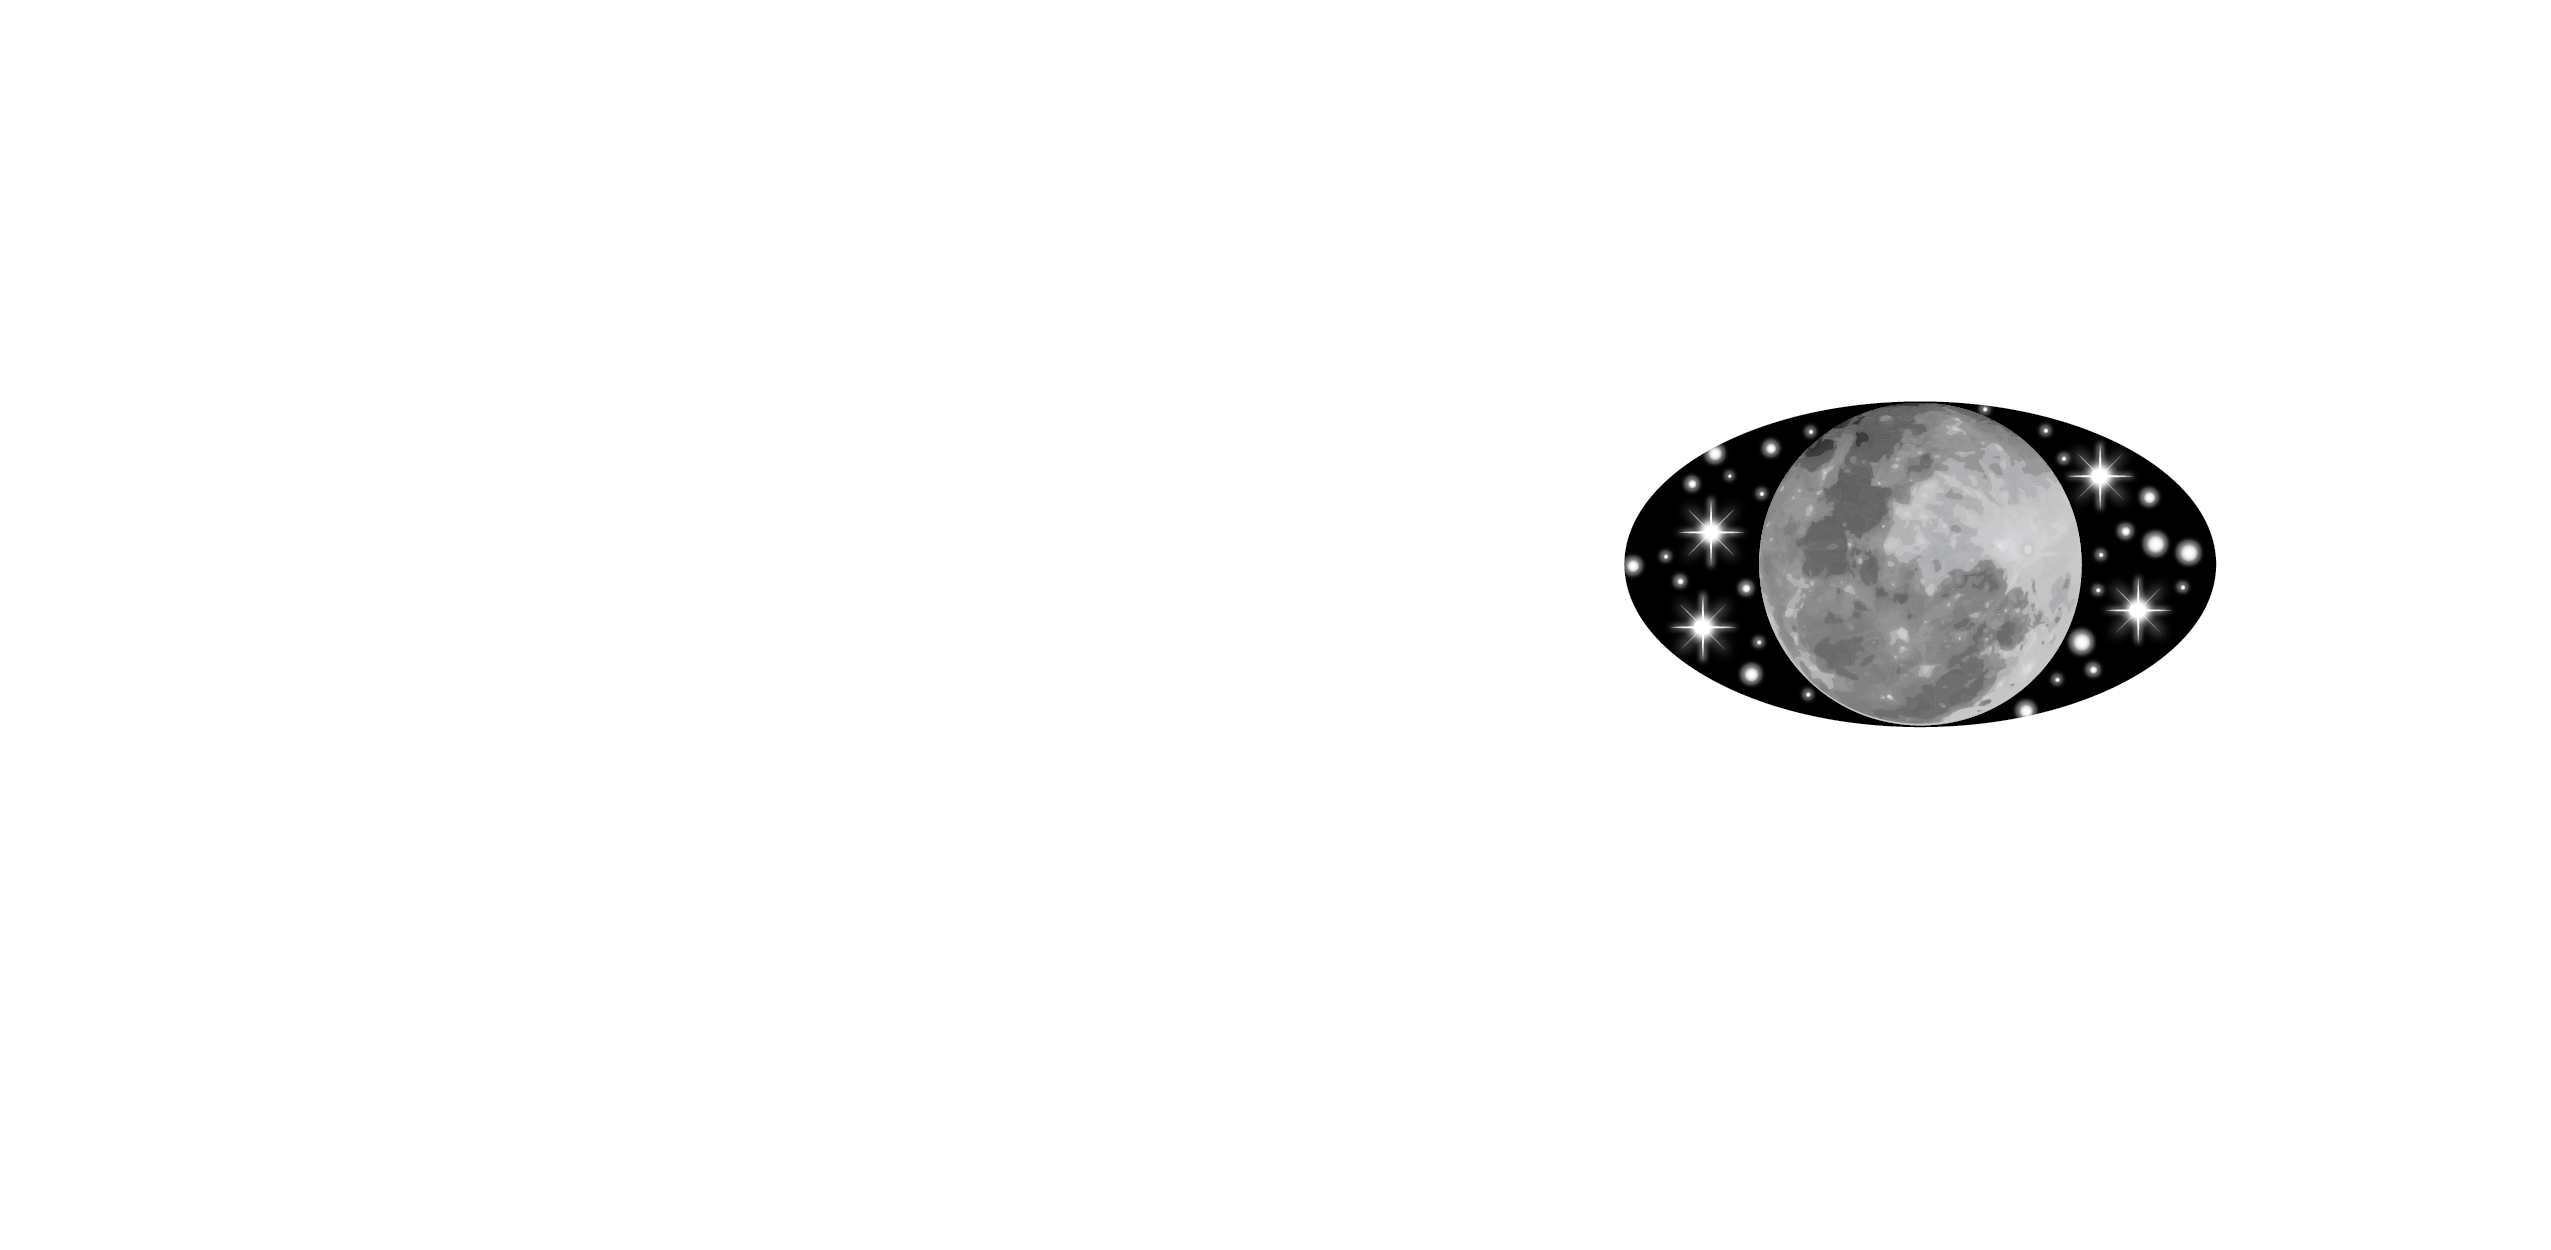 Bigelow Space Operations